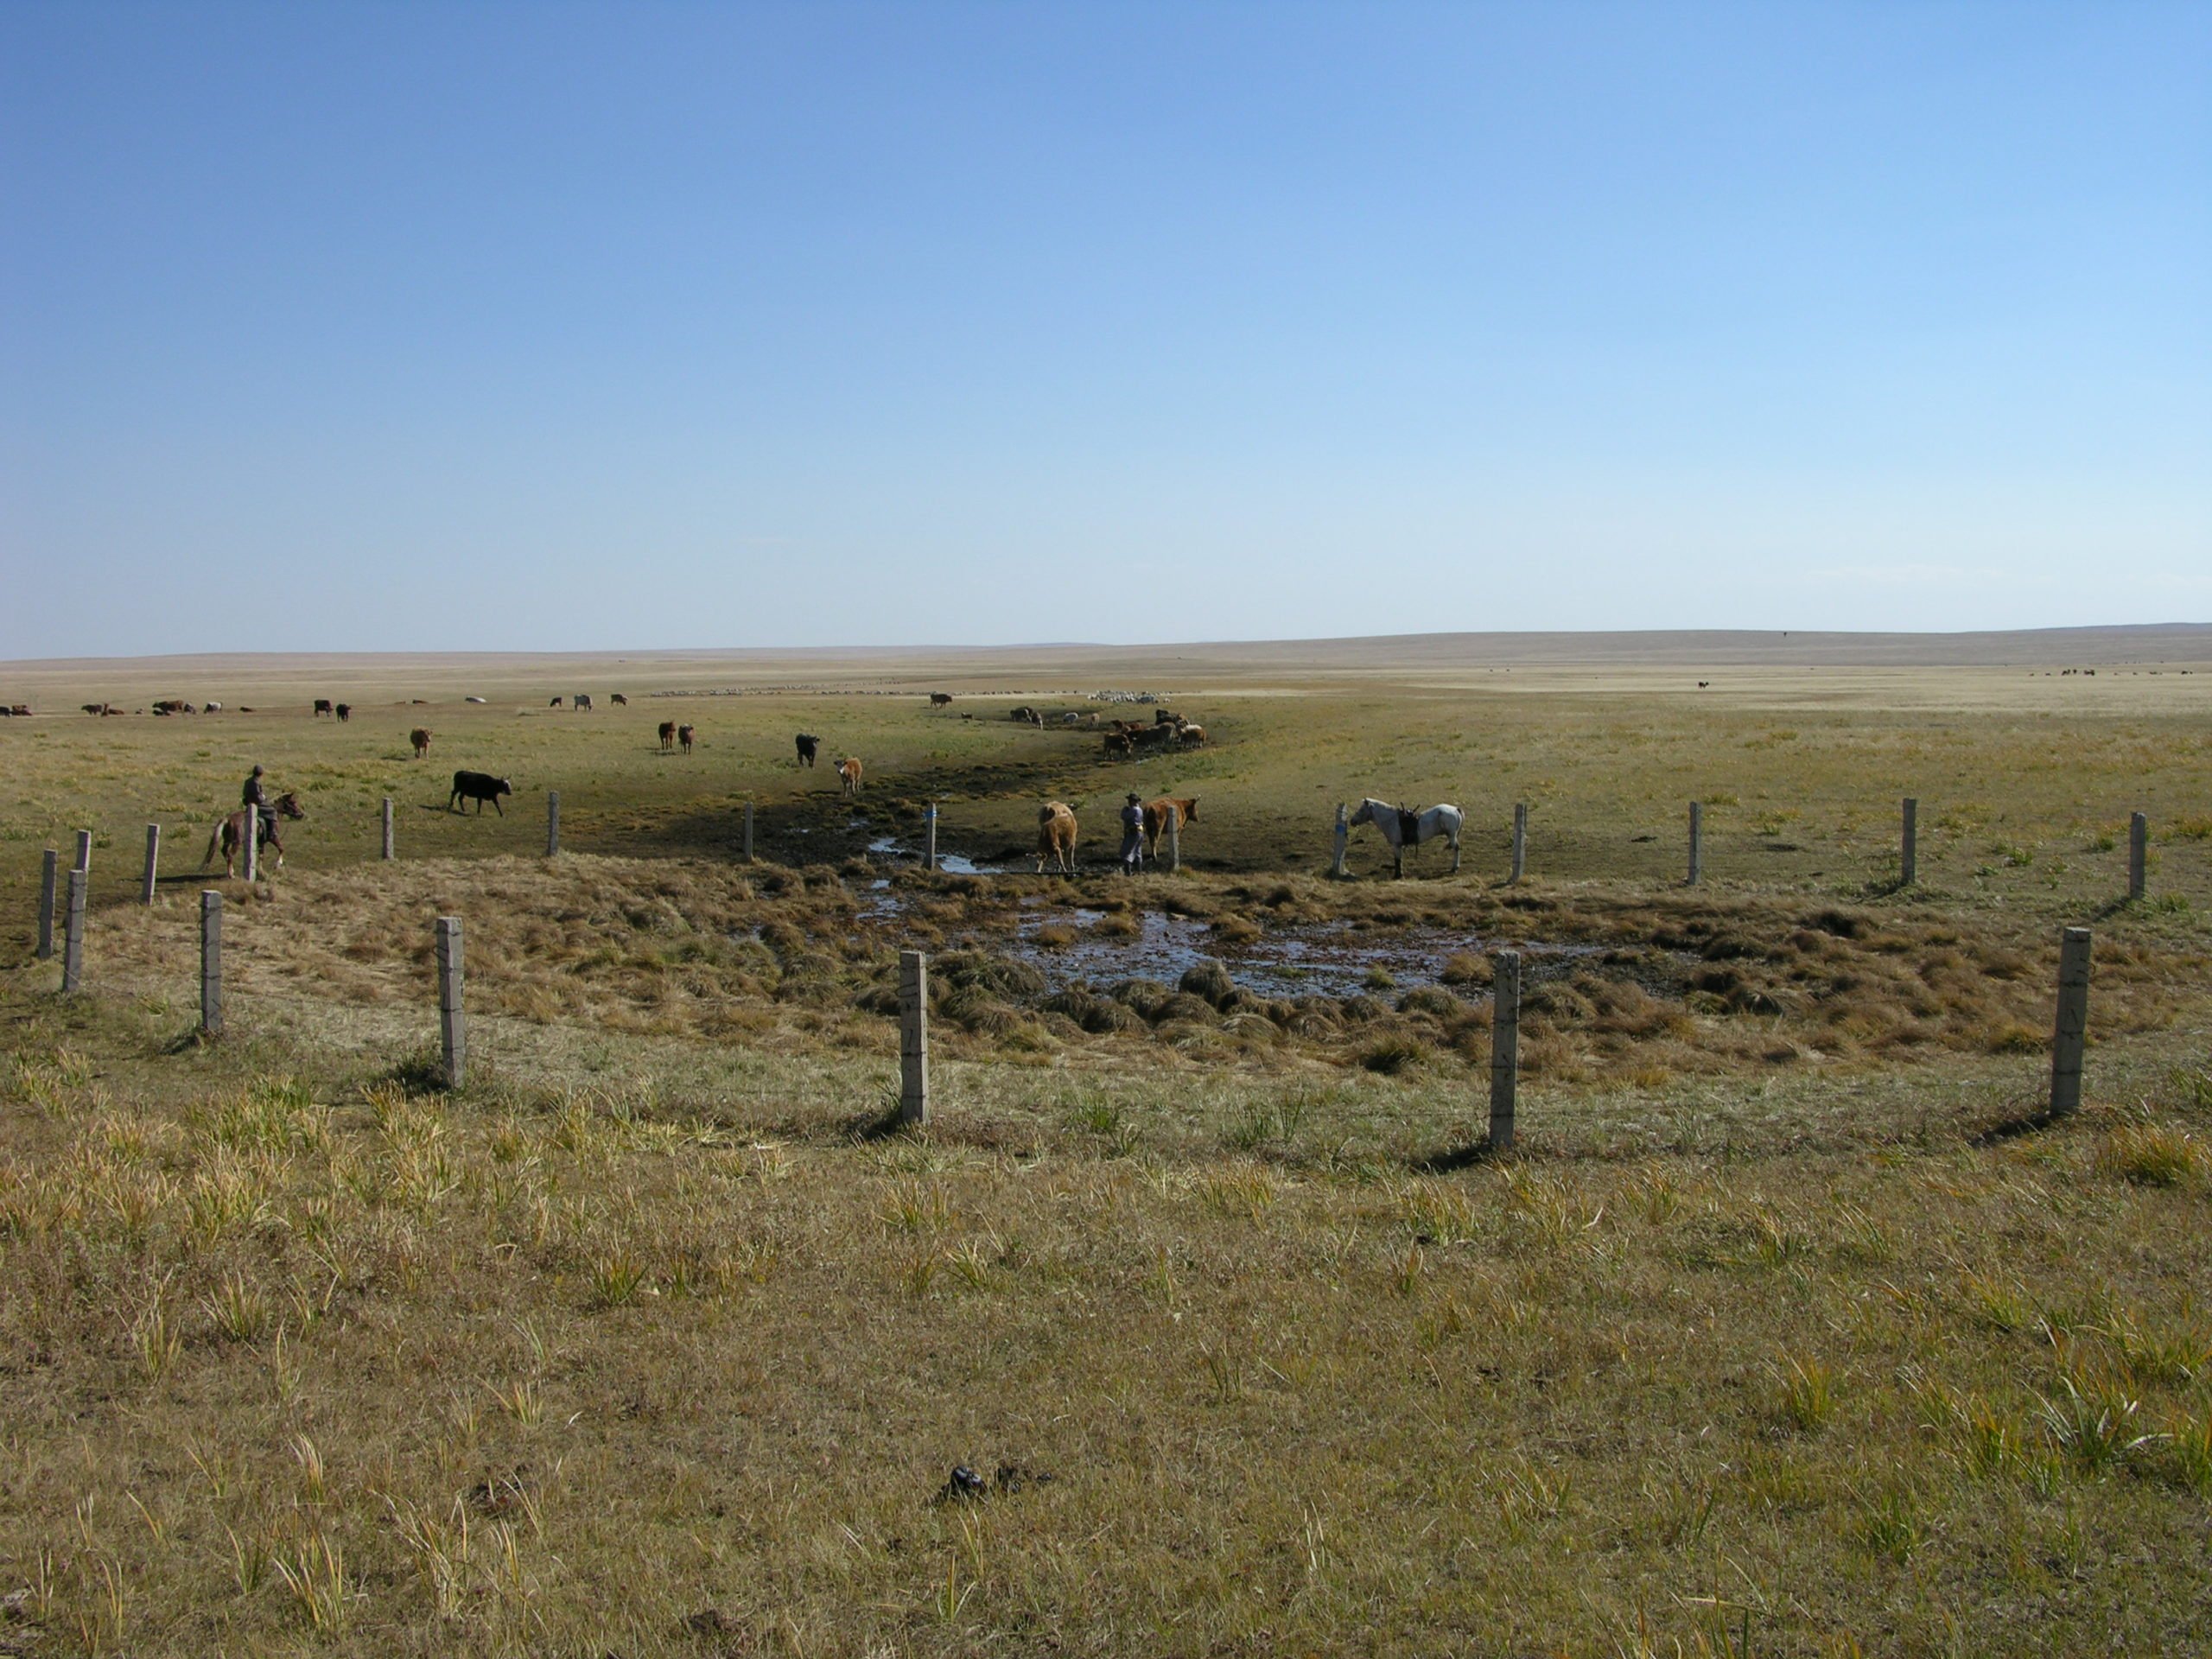 A water source in Toson Hulstay Nature Reserve, Mongolia in 2010.